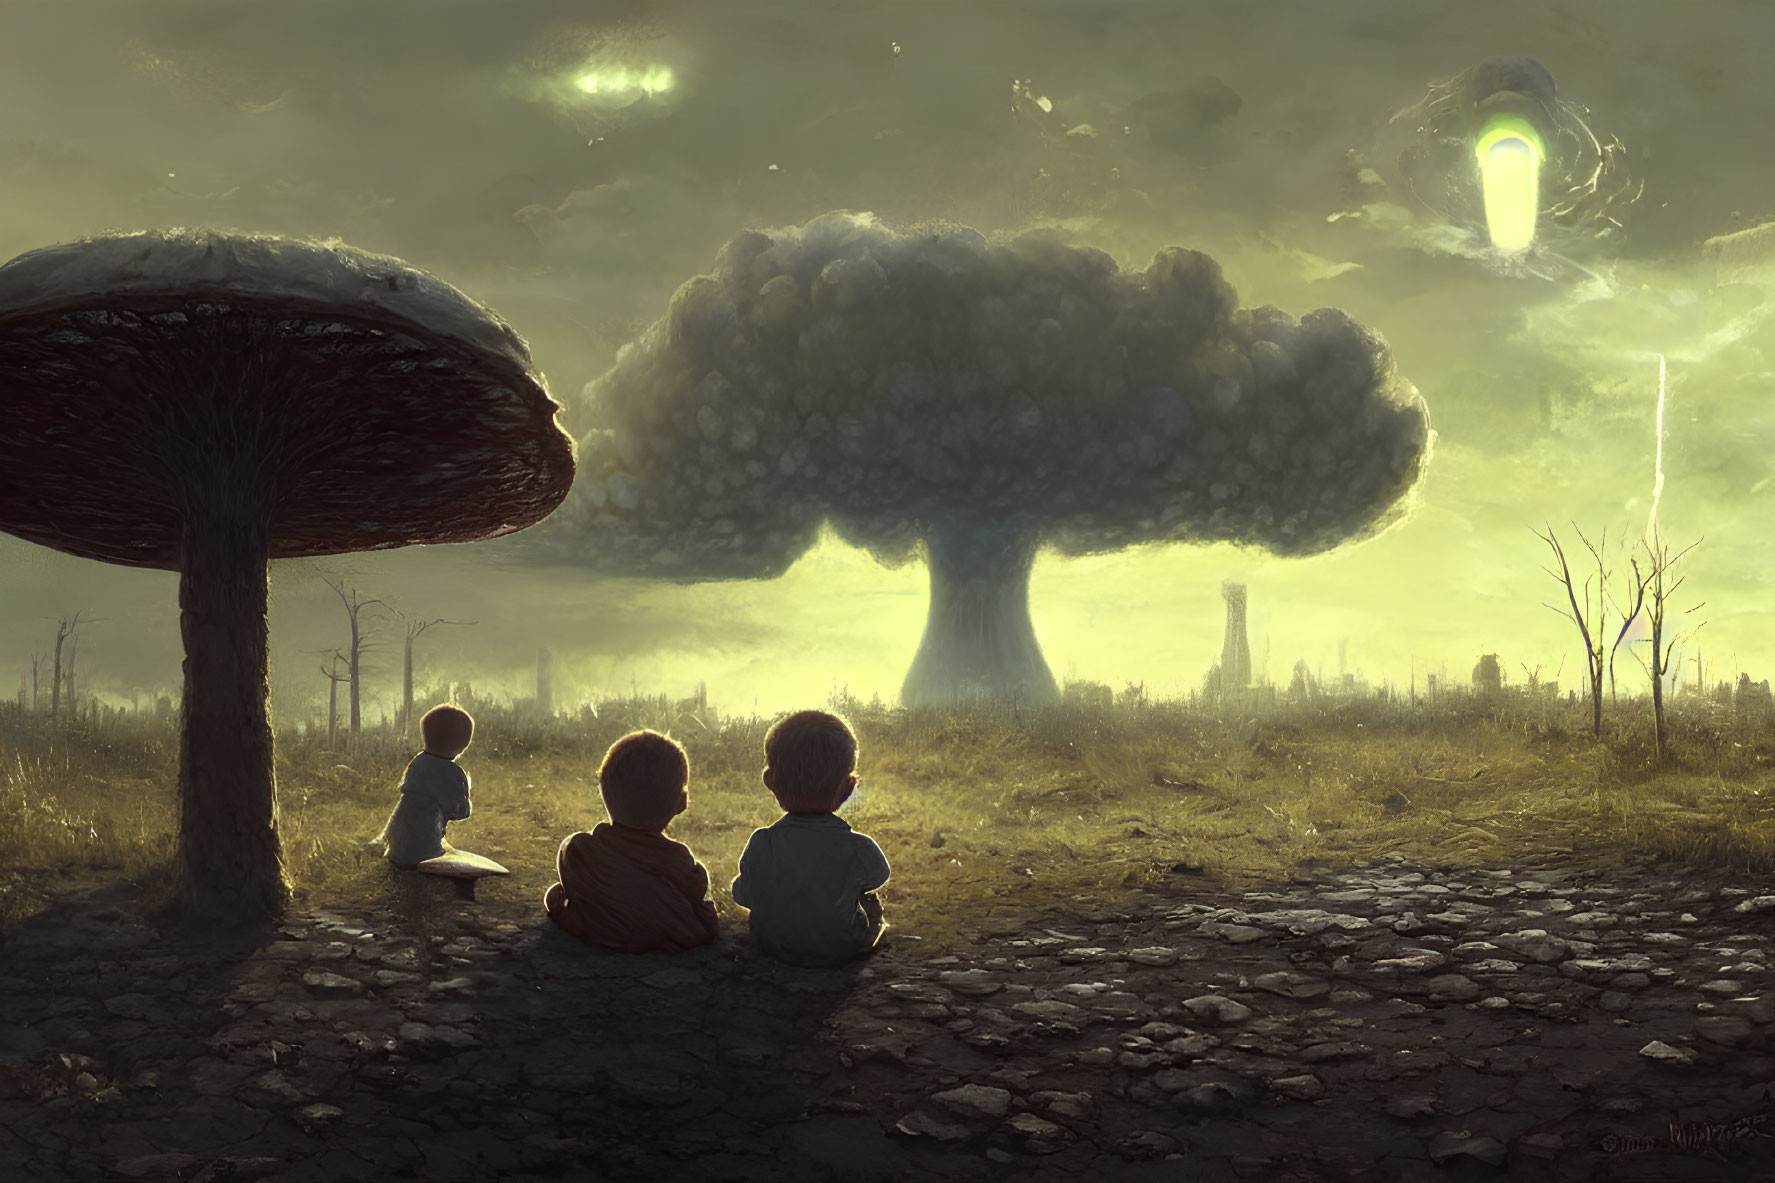 Children observing surreal glowing landscape with mushrooms and tree-like structures.